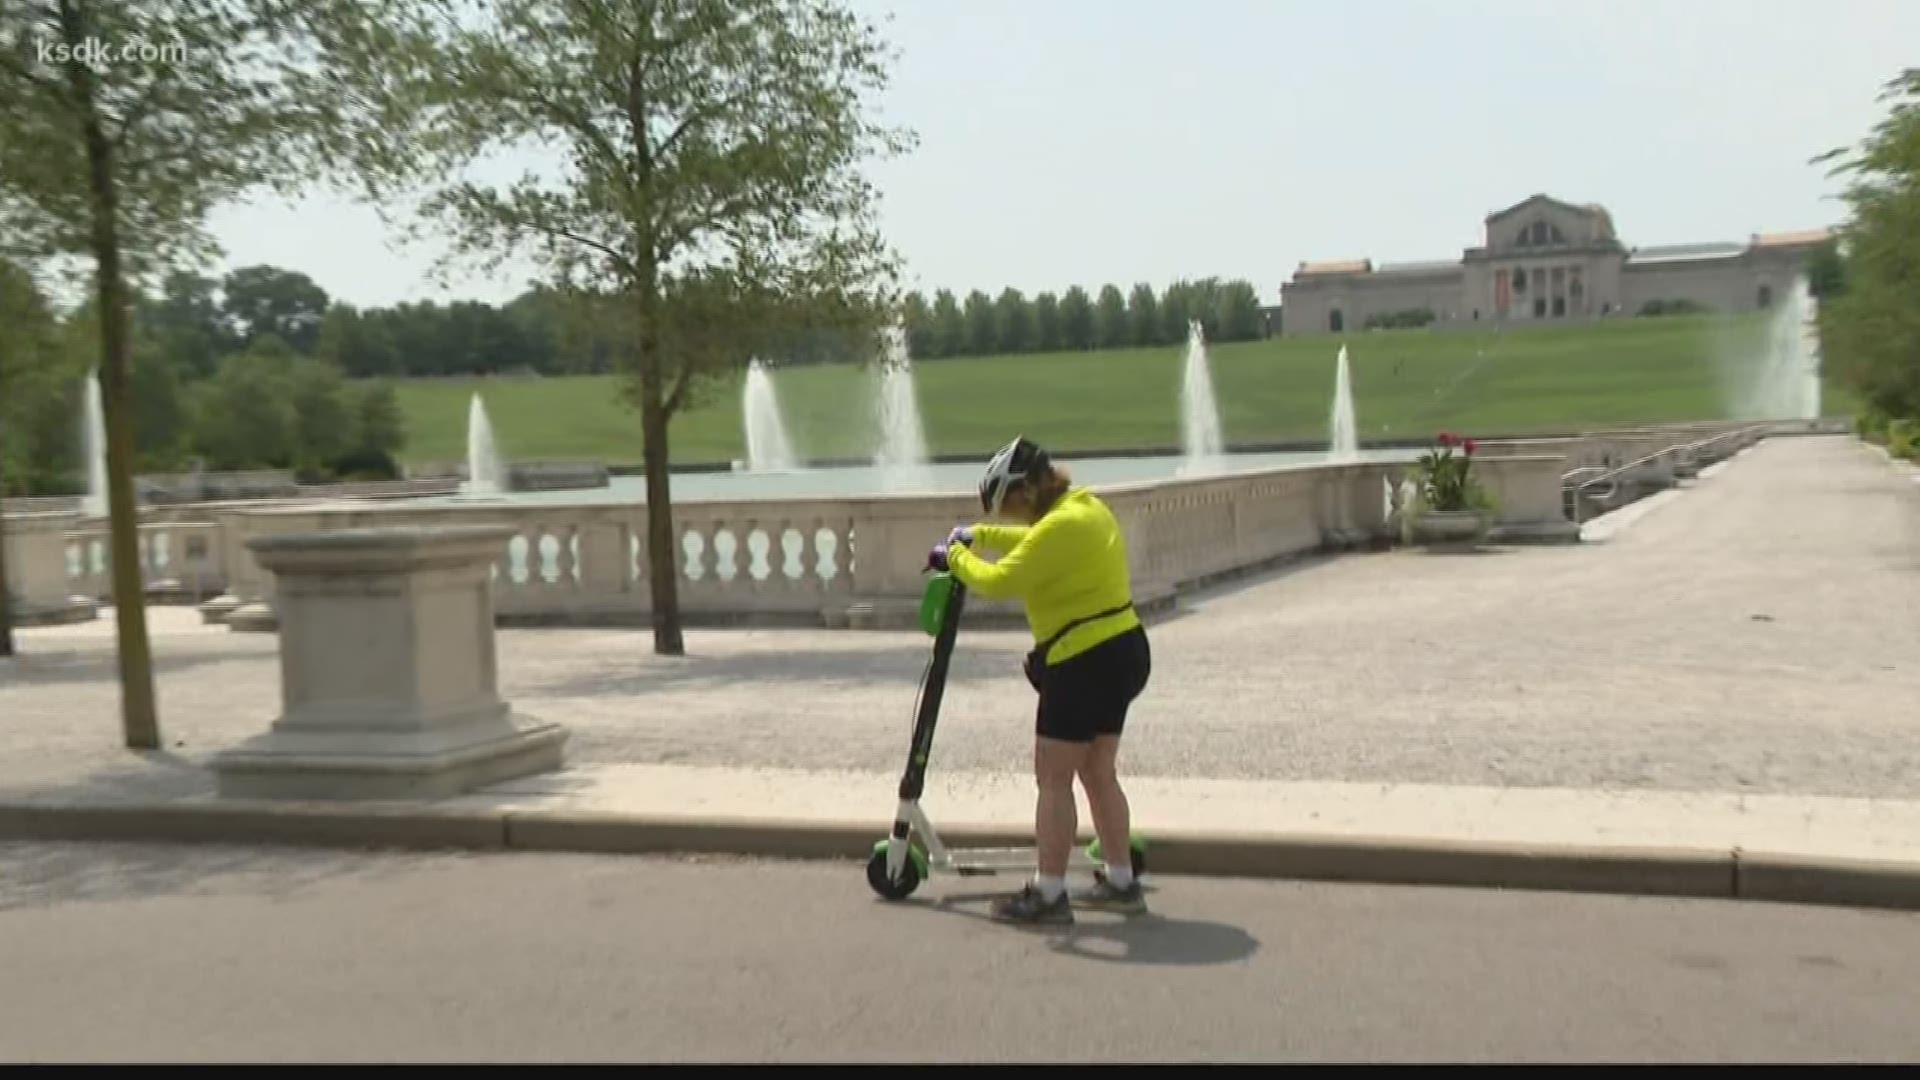 There is a new push for technology to slow those scooters down.